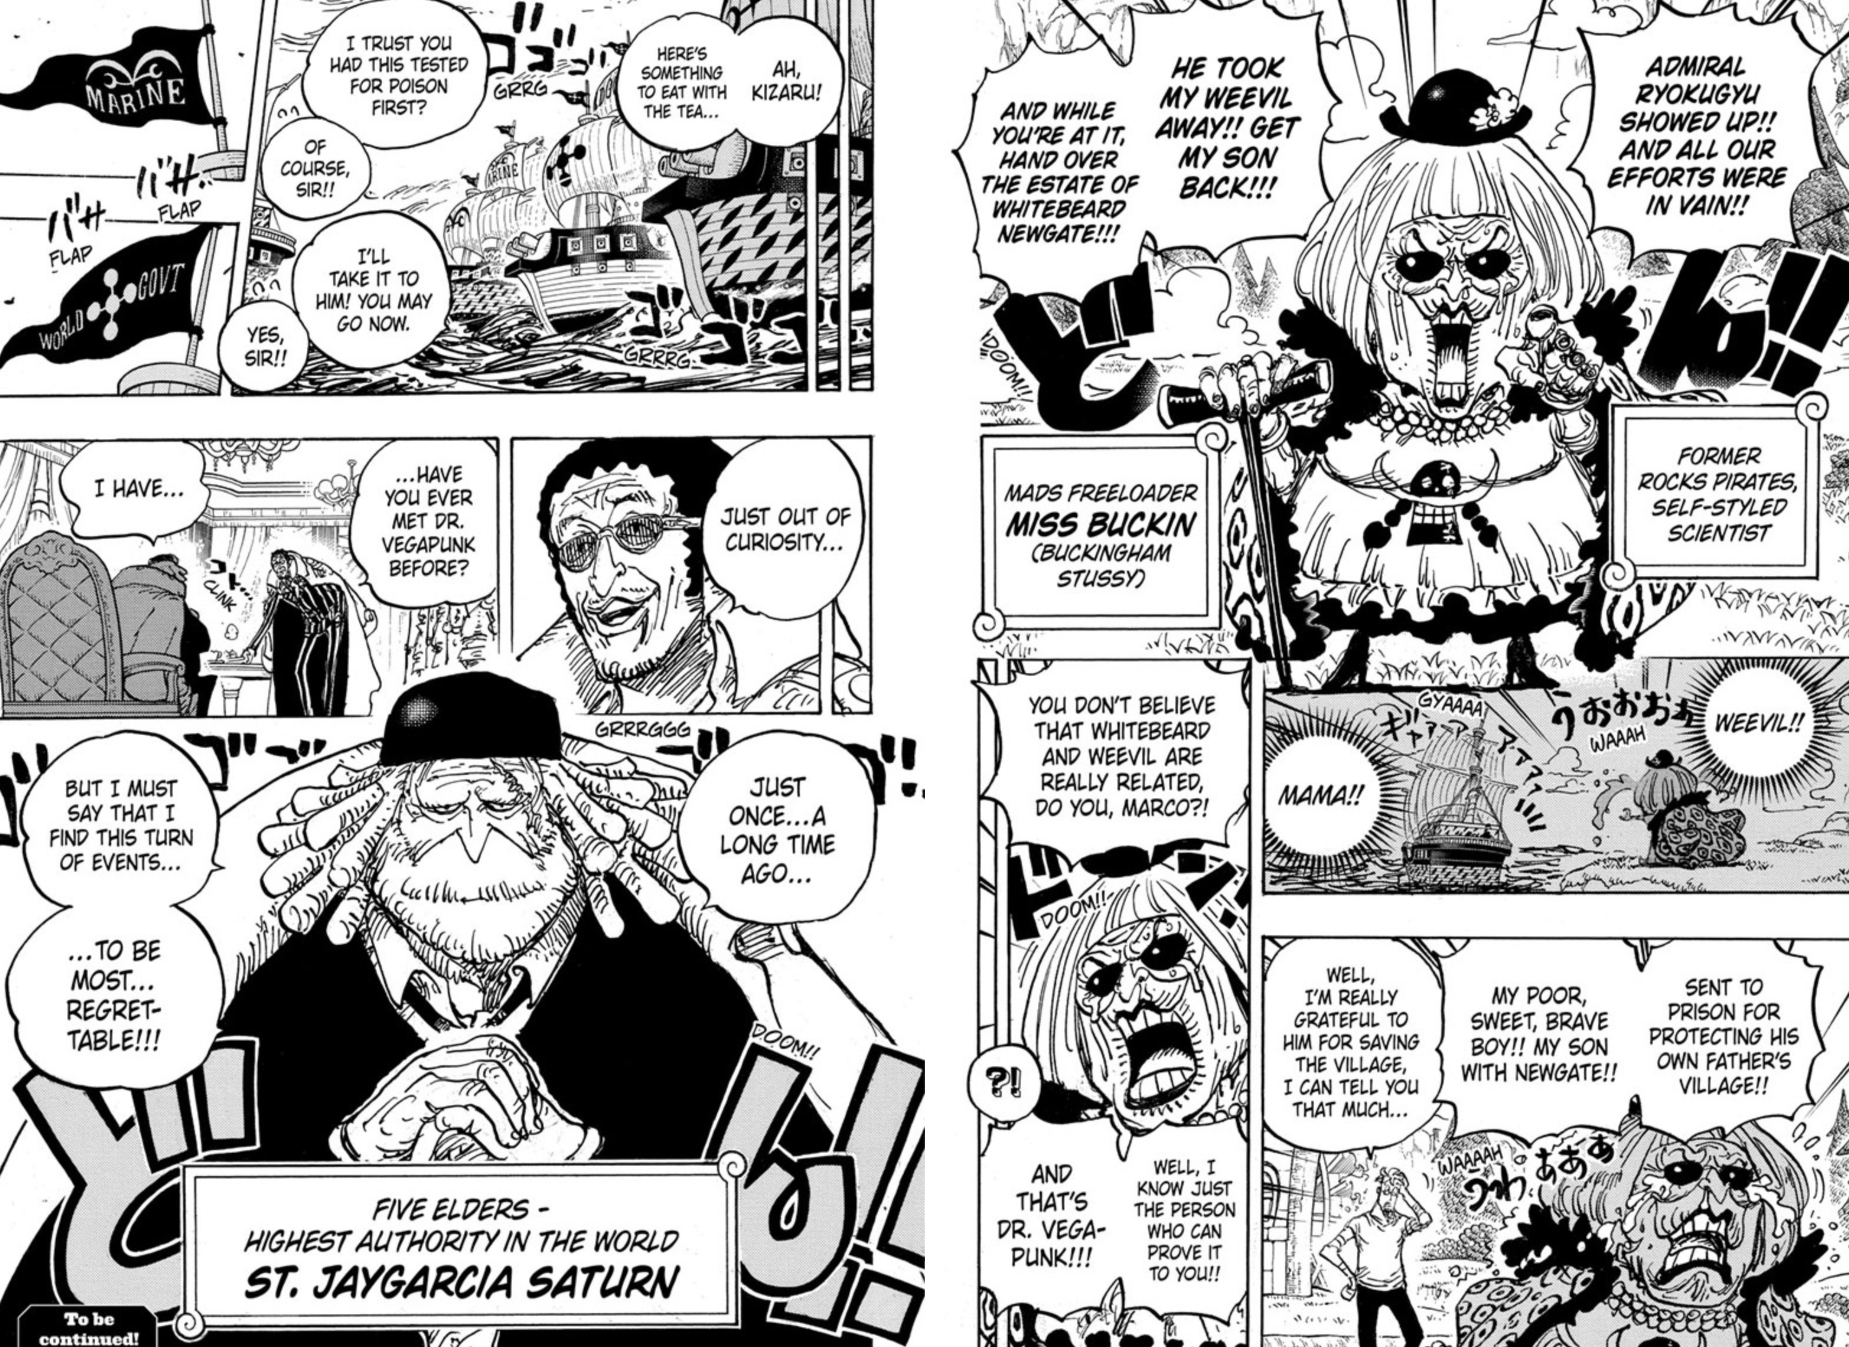 One Piece Chapter 1073 Pages 14-15